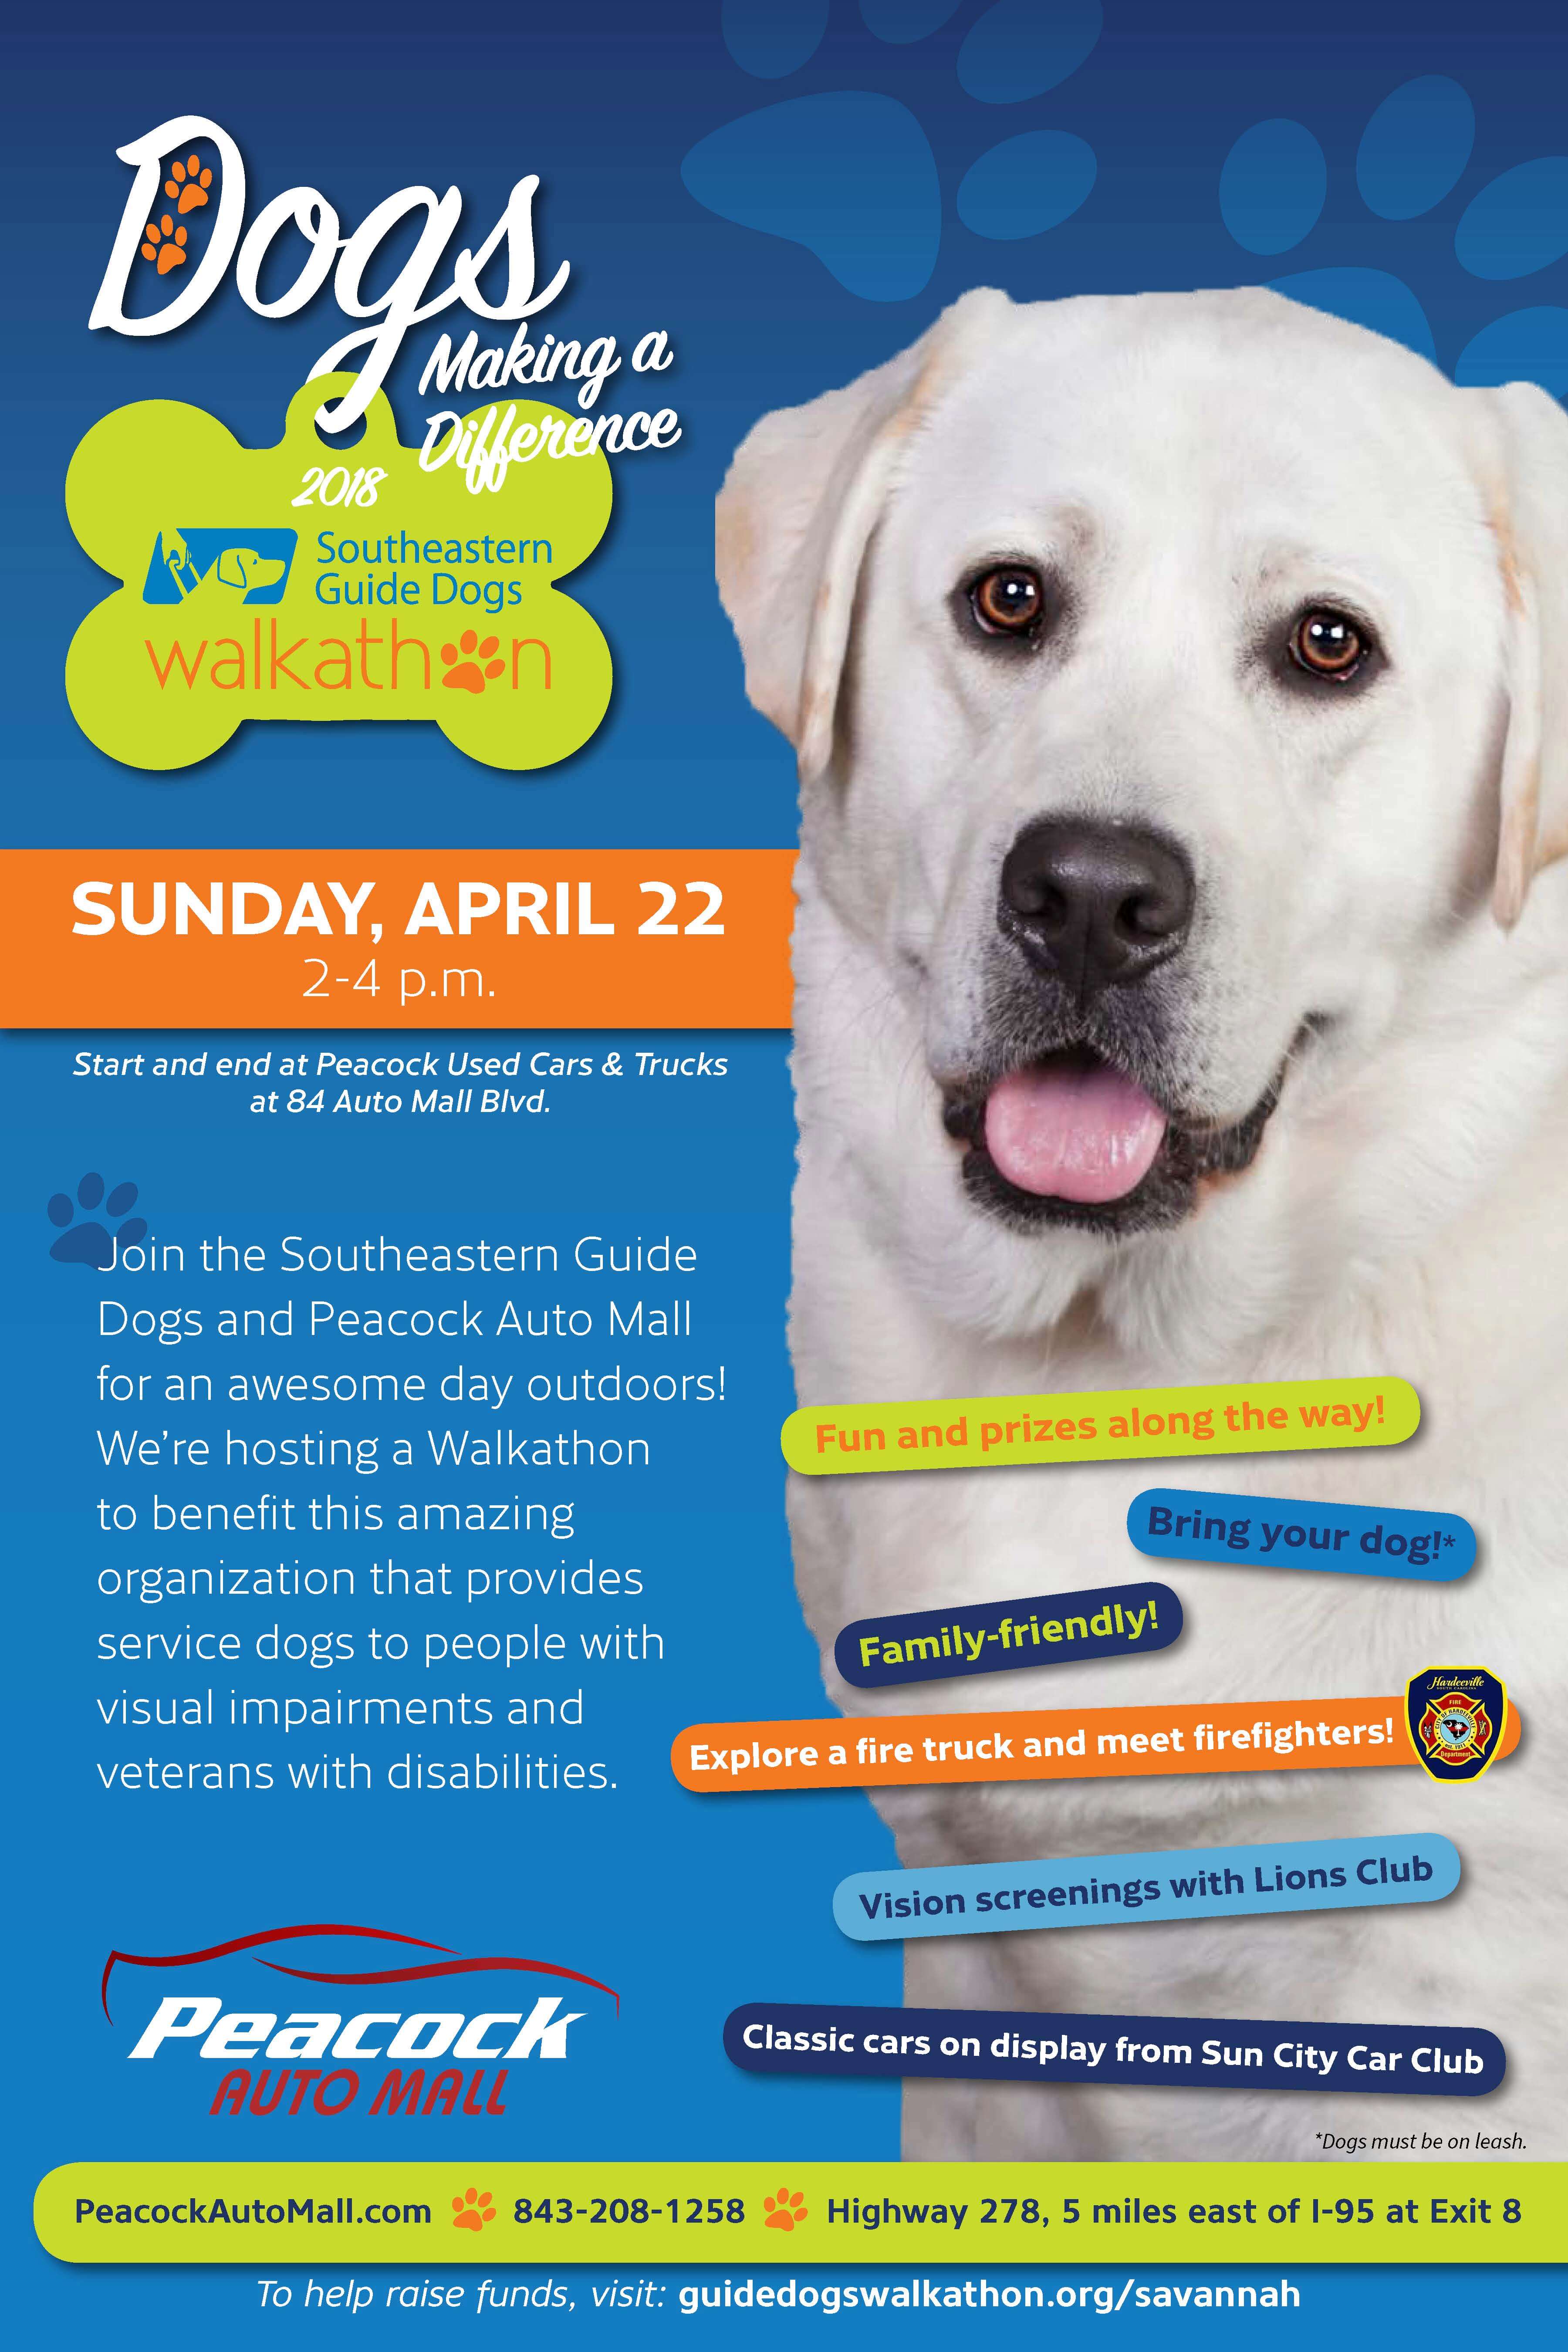 Southeastern Guide Dogs Walkathon at Peacock Automotive